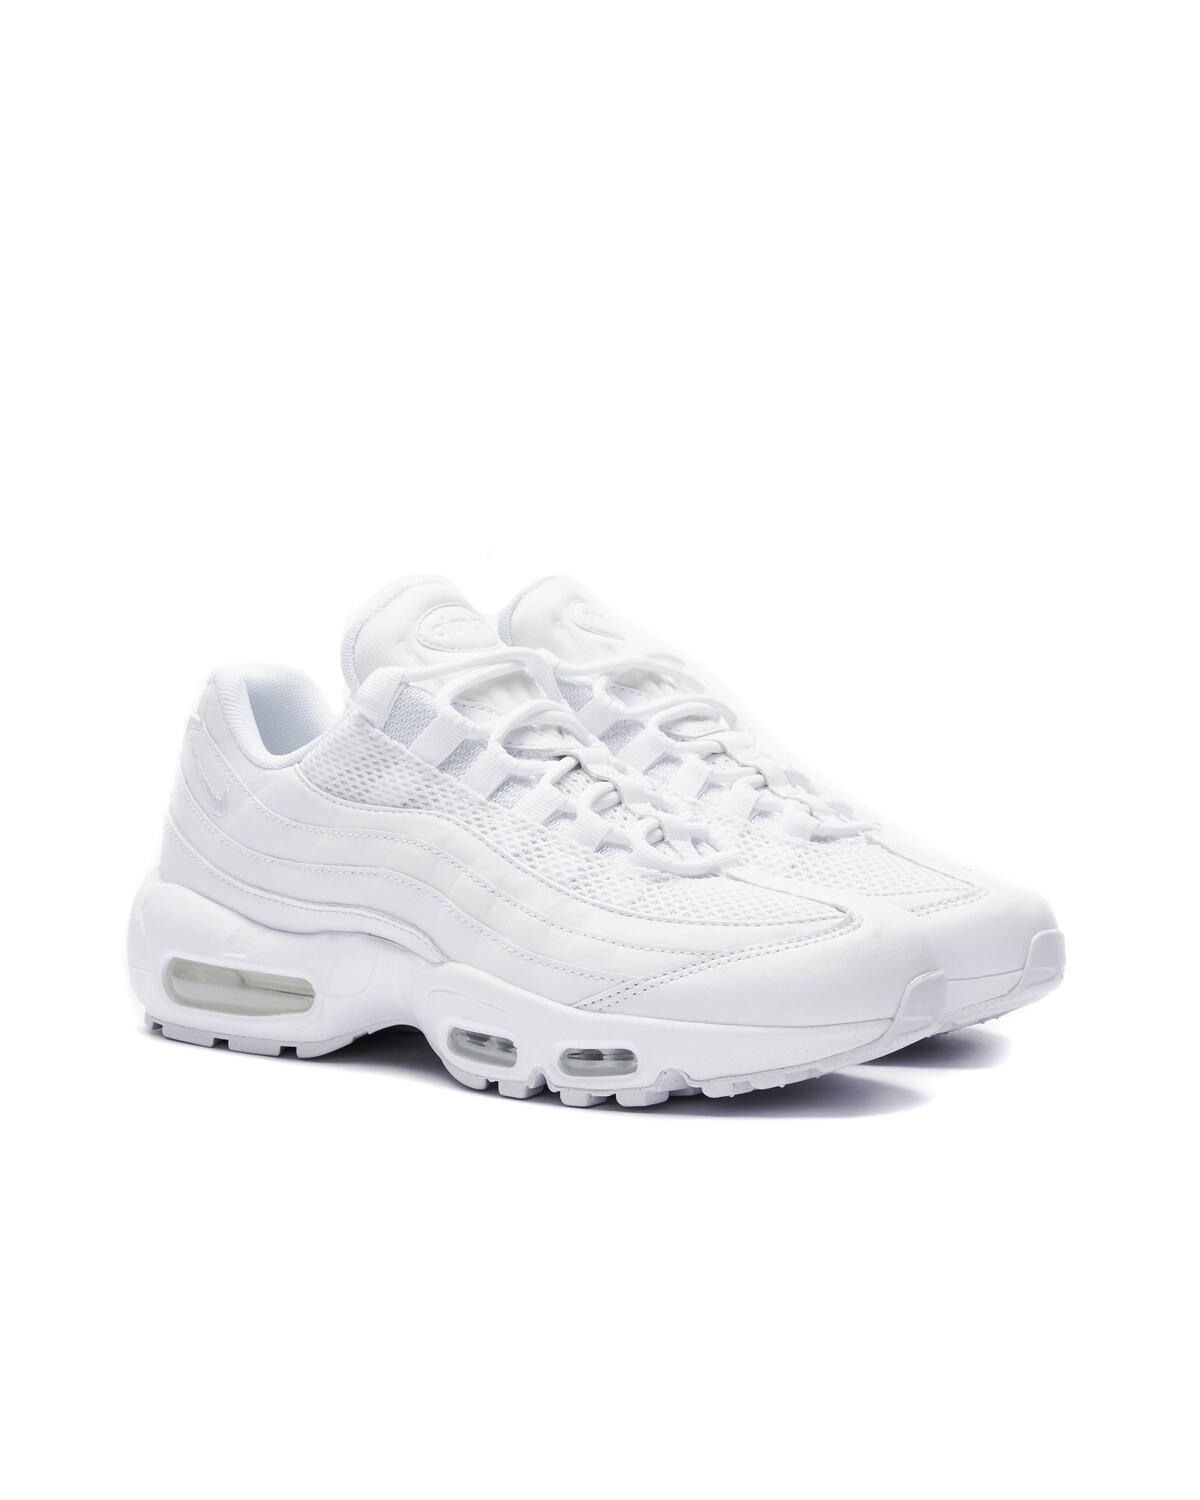 Nike Naked W Nike WMNS AIR MAX | DH8015-100 | IetpShops STORE